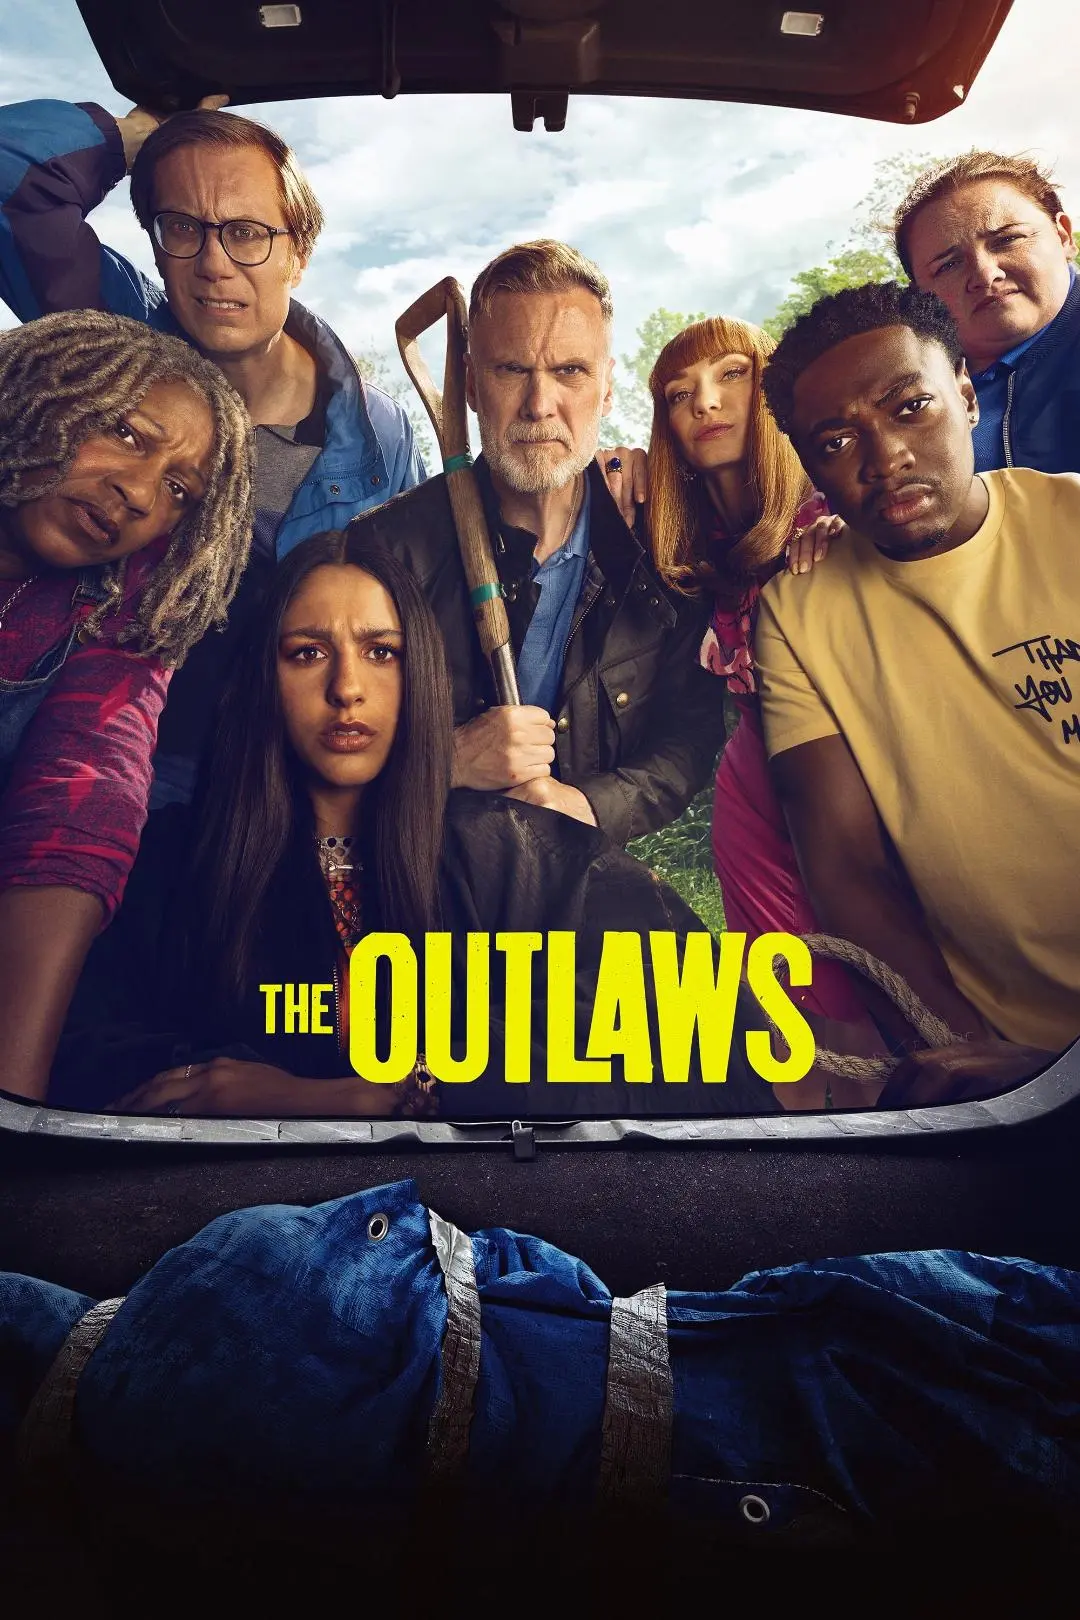 The Outlaws_peliplat